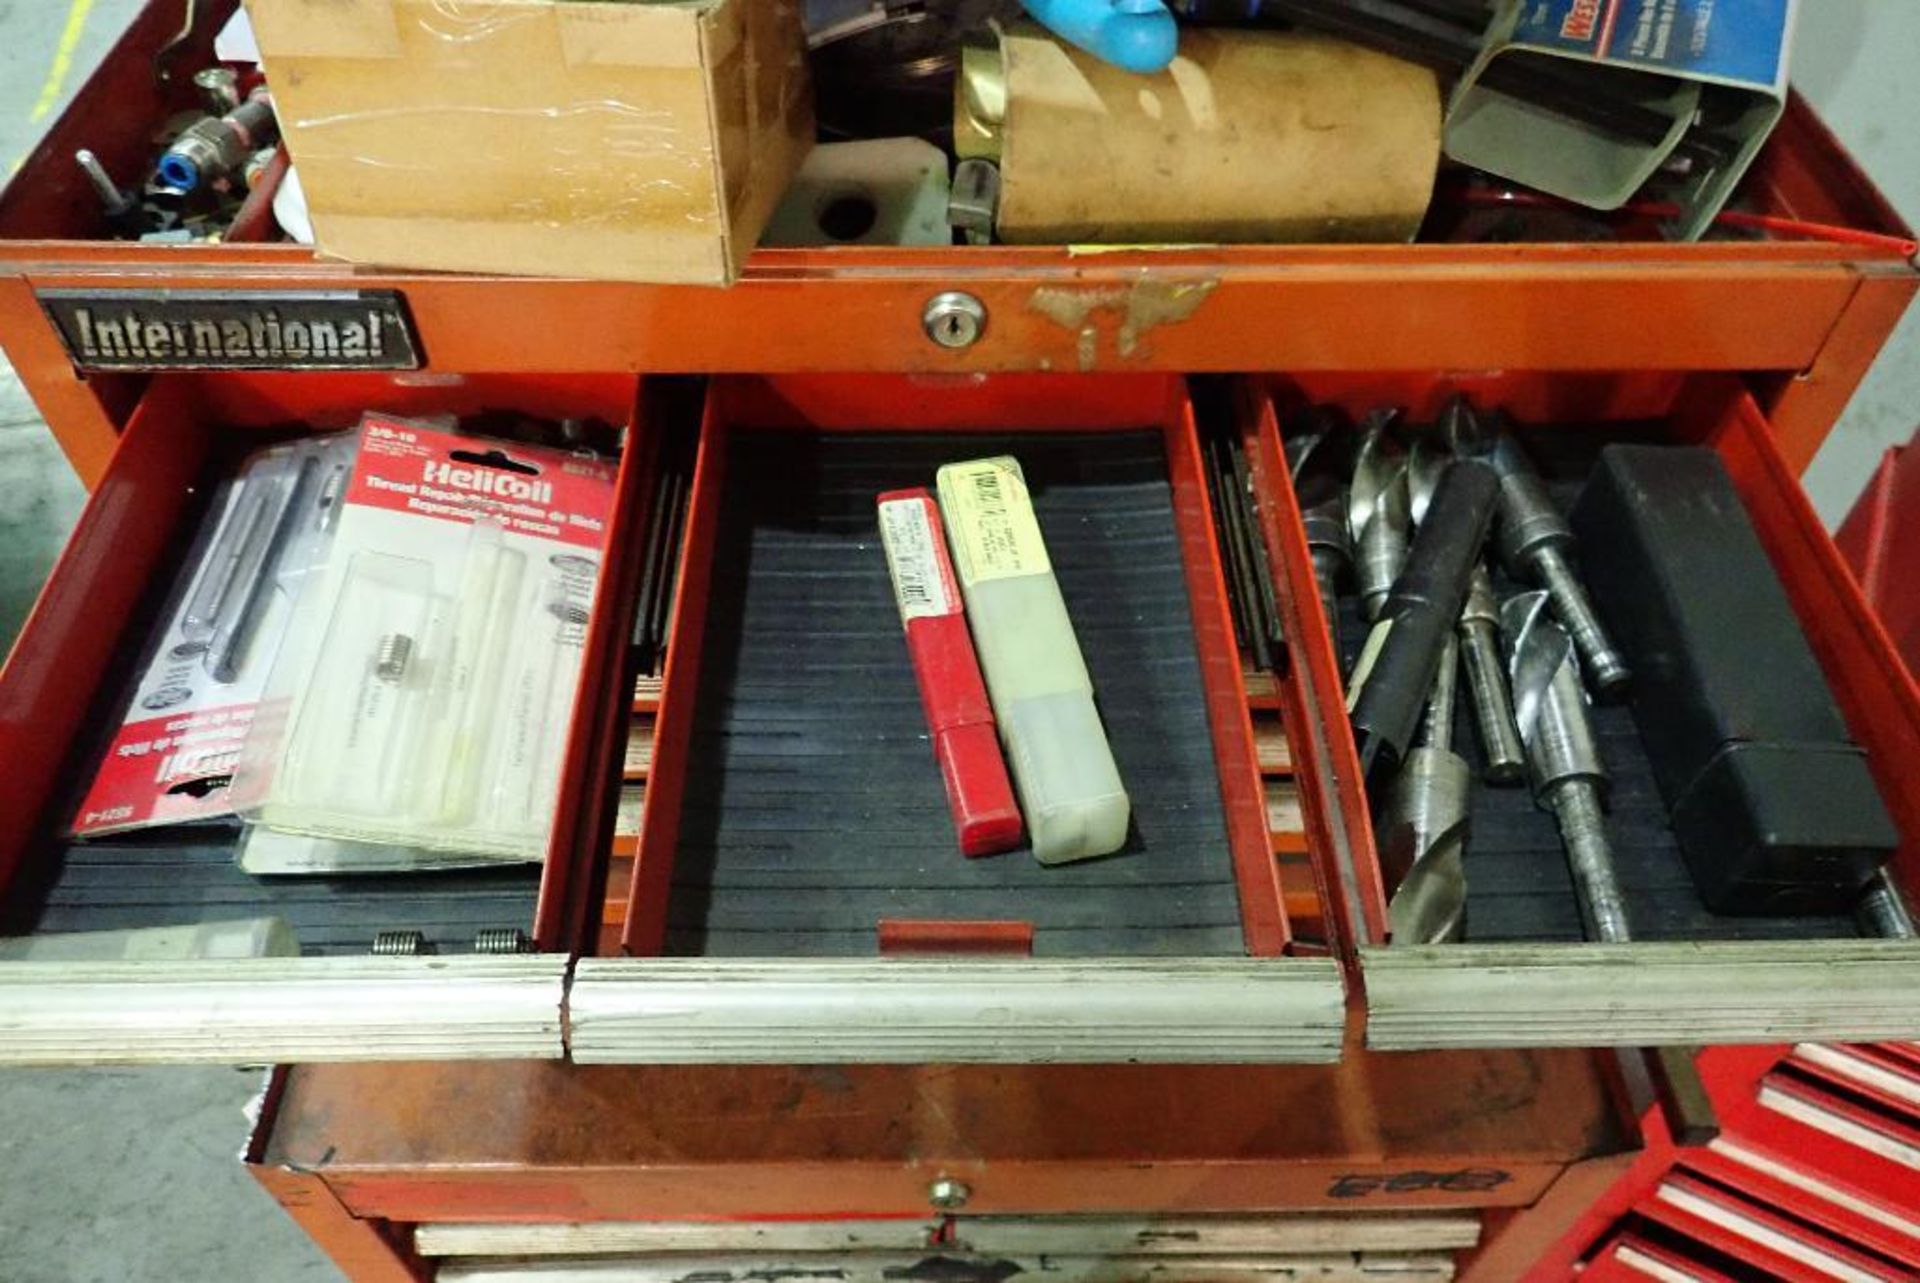 (2) tool chests with contents, wrenches, sockets, drill bits screw drivers, air tools, hammers, plie - Image 18 of 31